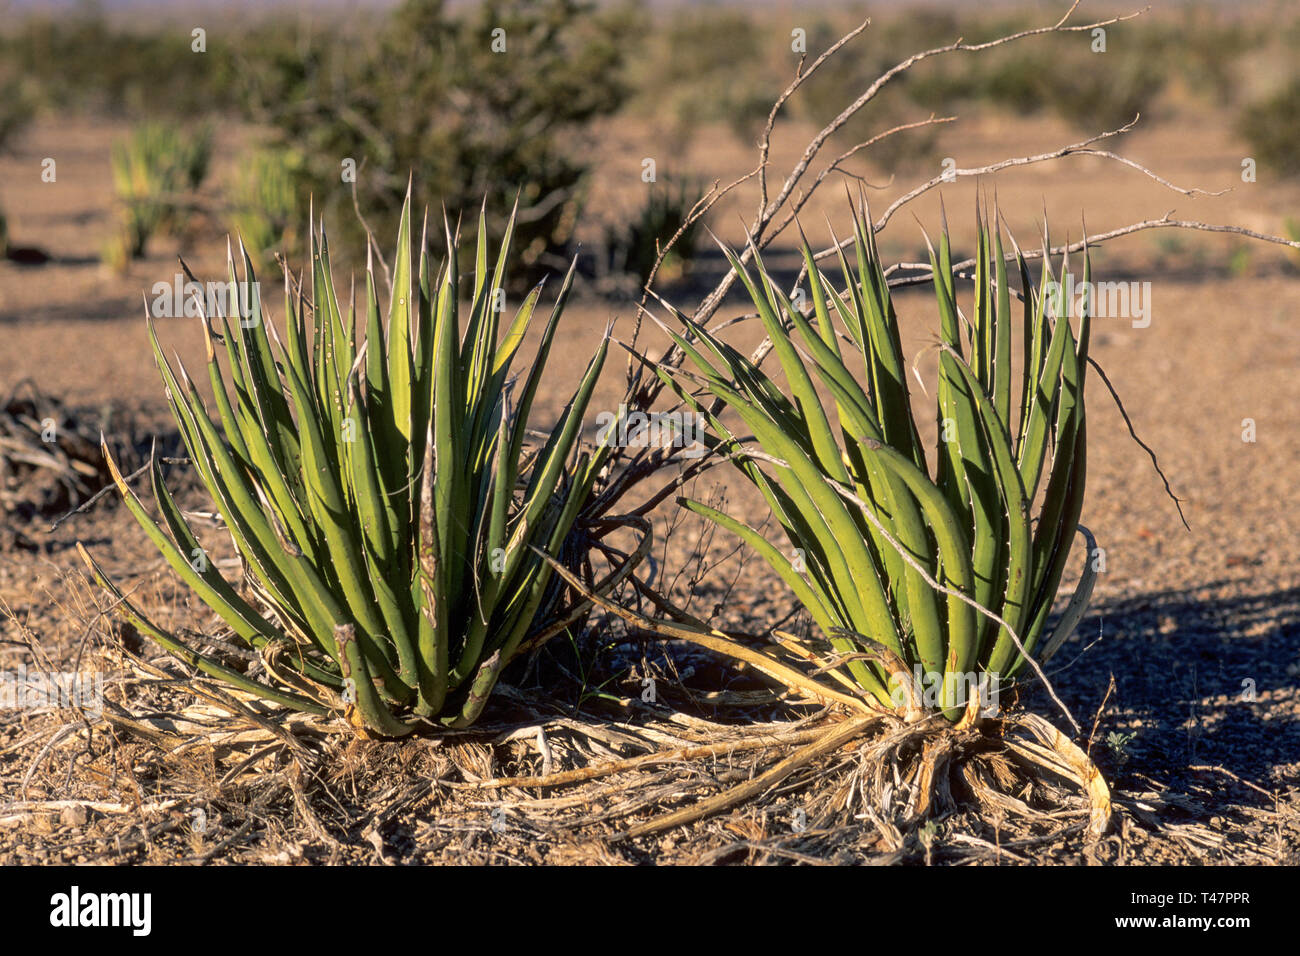 Lechuguilla agaves at Chihuahuan Desert near Old Ore Road in Big Bend National Park, Texas, USA Stock Photo